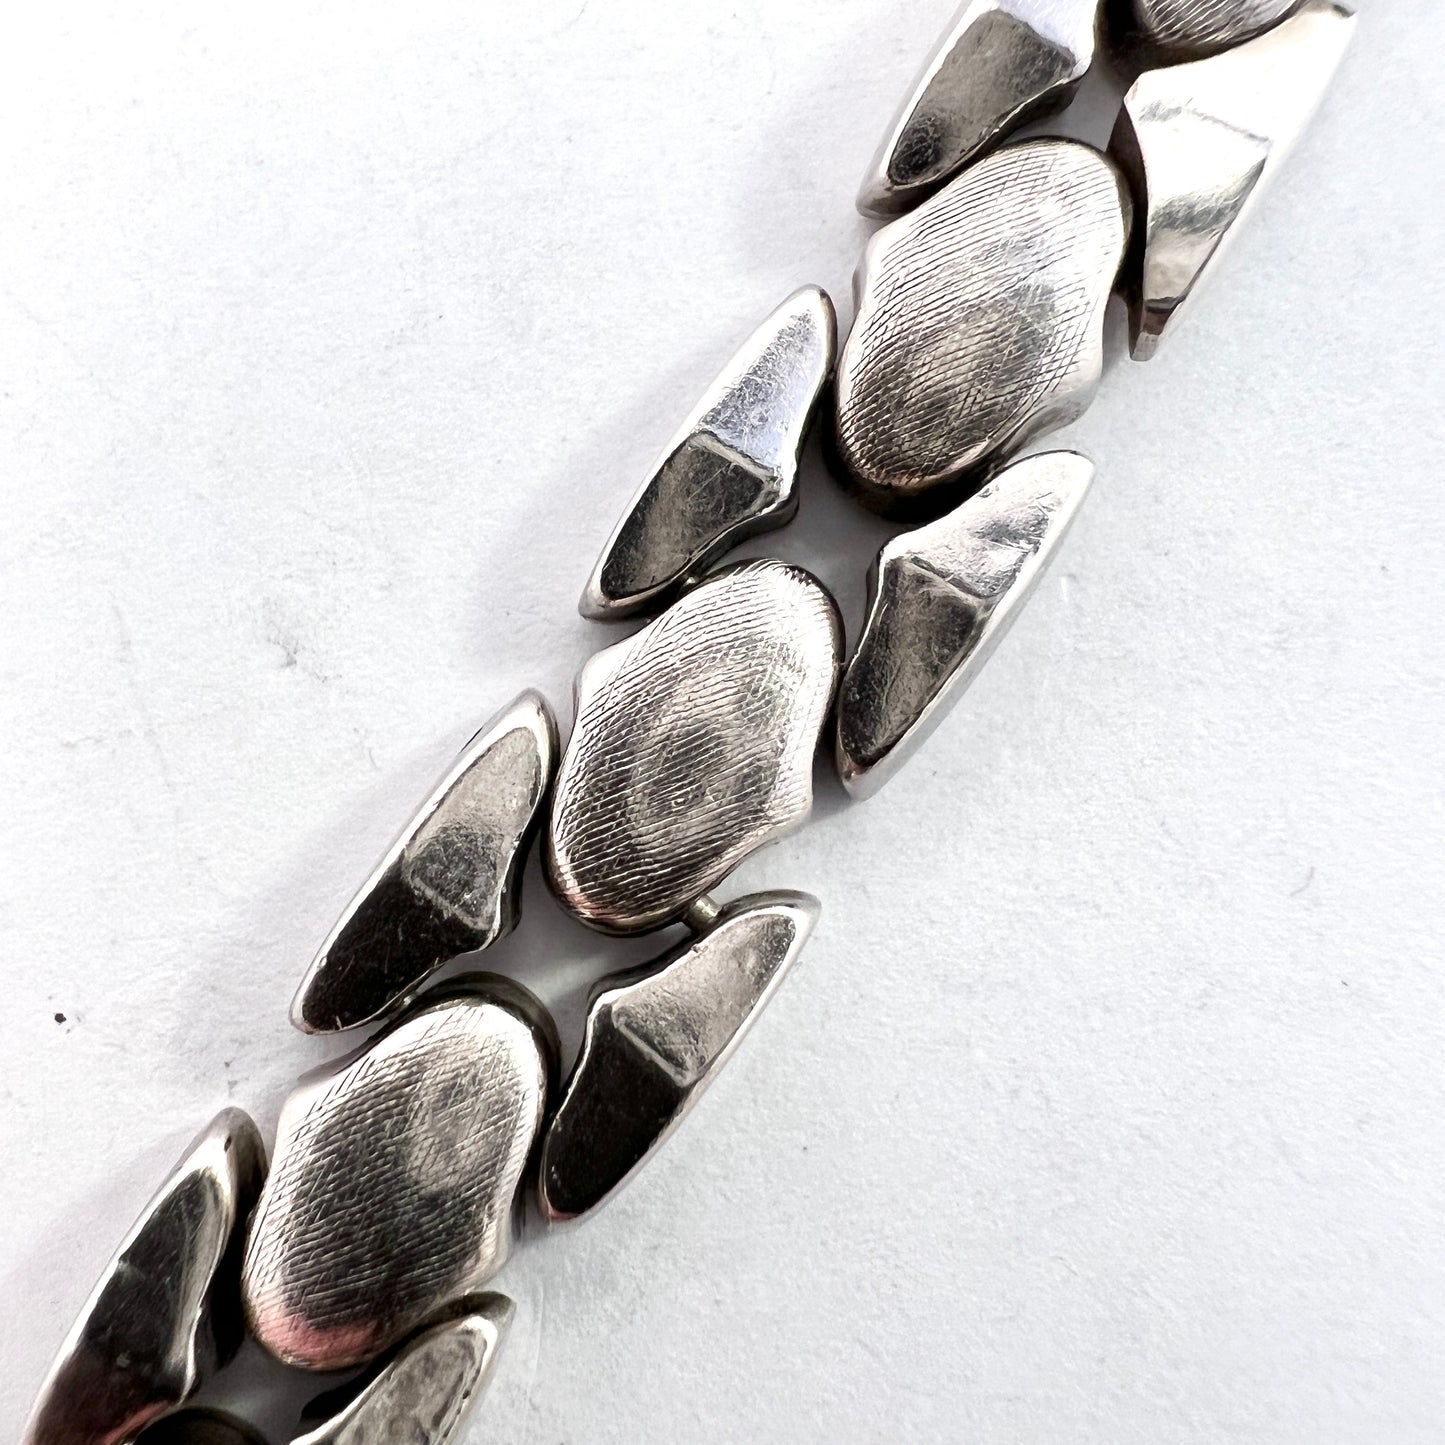 PIAZZA MICHELE, Vicenza, Italy 1944-68 Mid Century Solid Silver Bracelet.